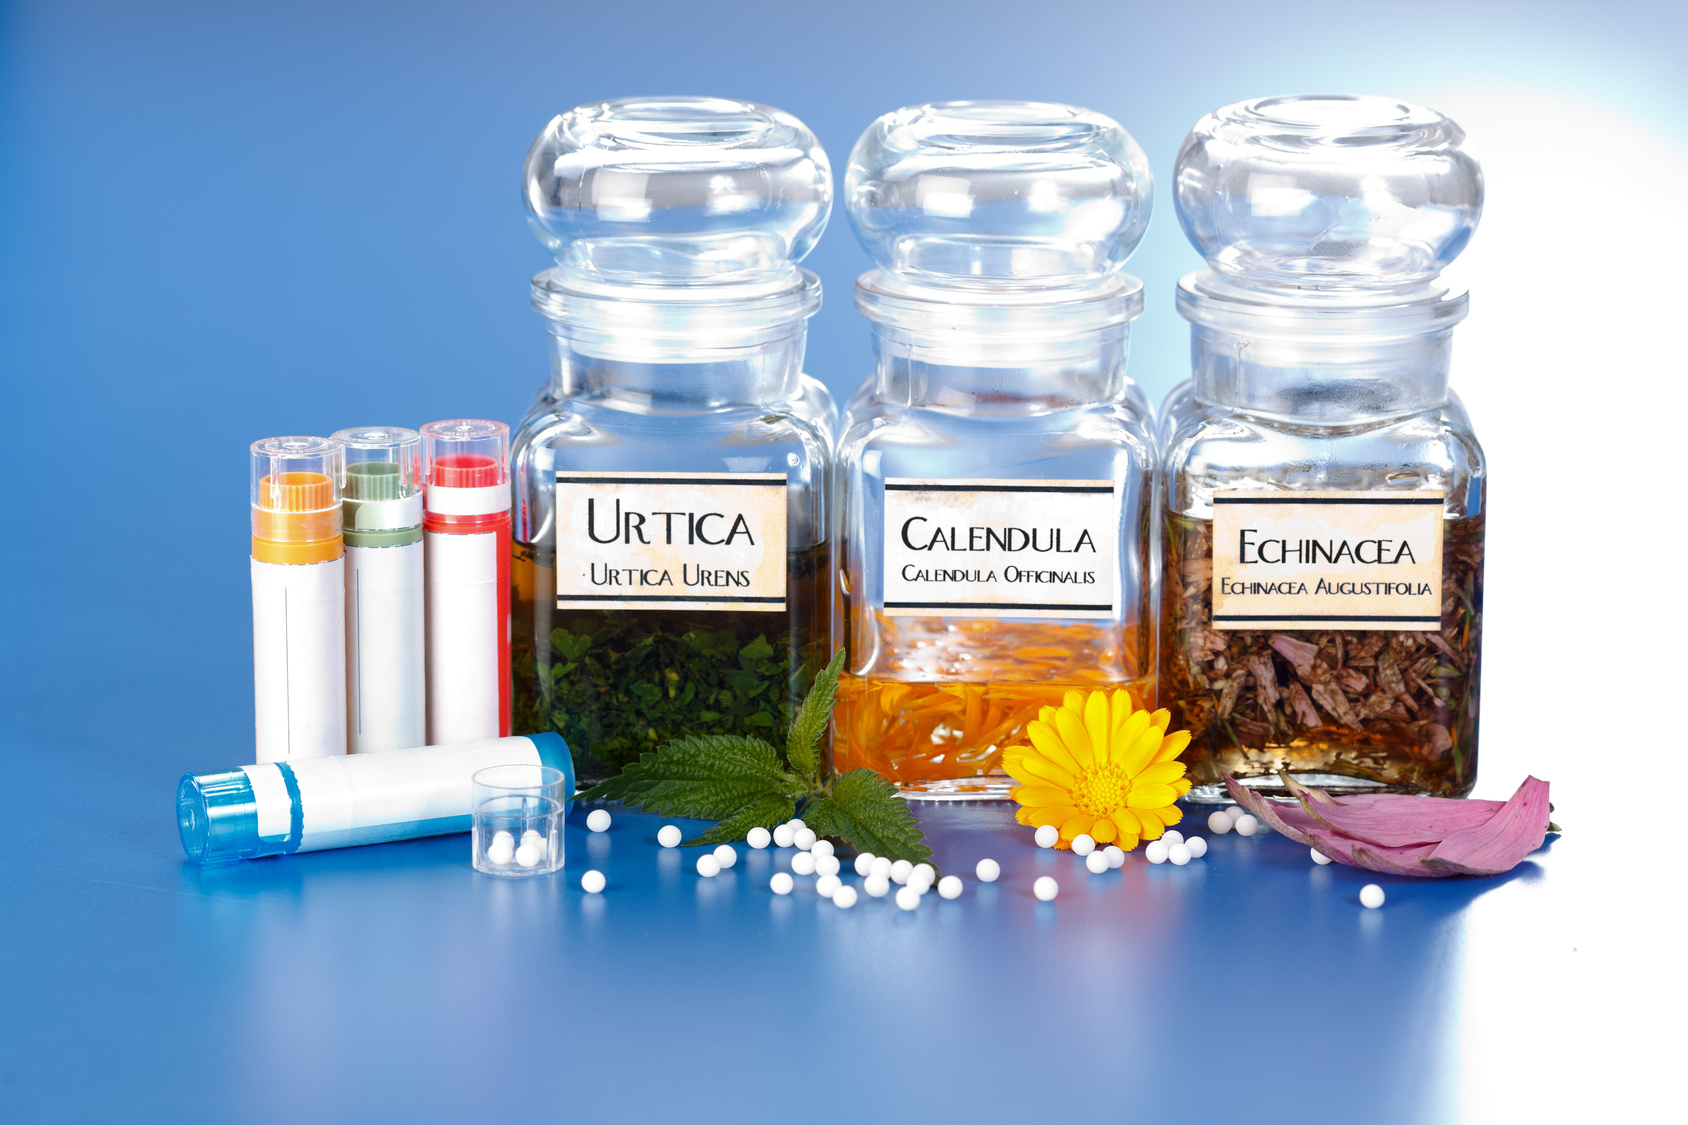 Easy Homeopathy: Homeopathic First Aid for the Whole Family